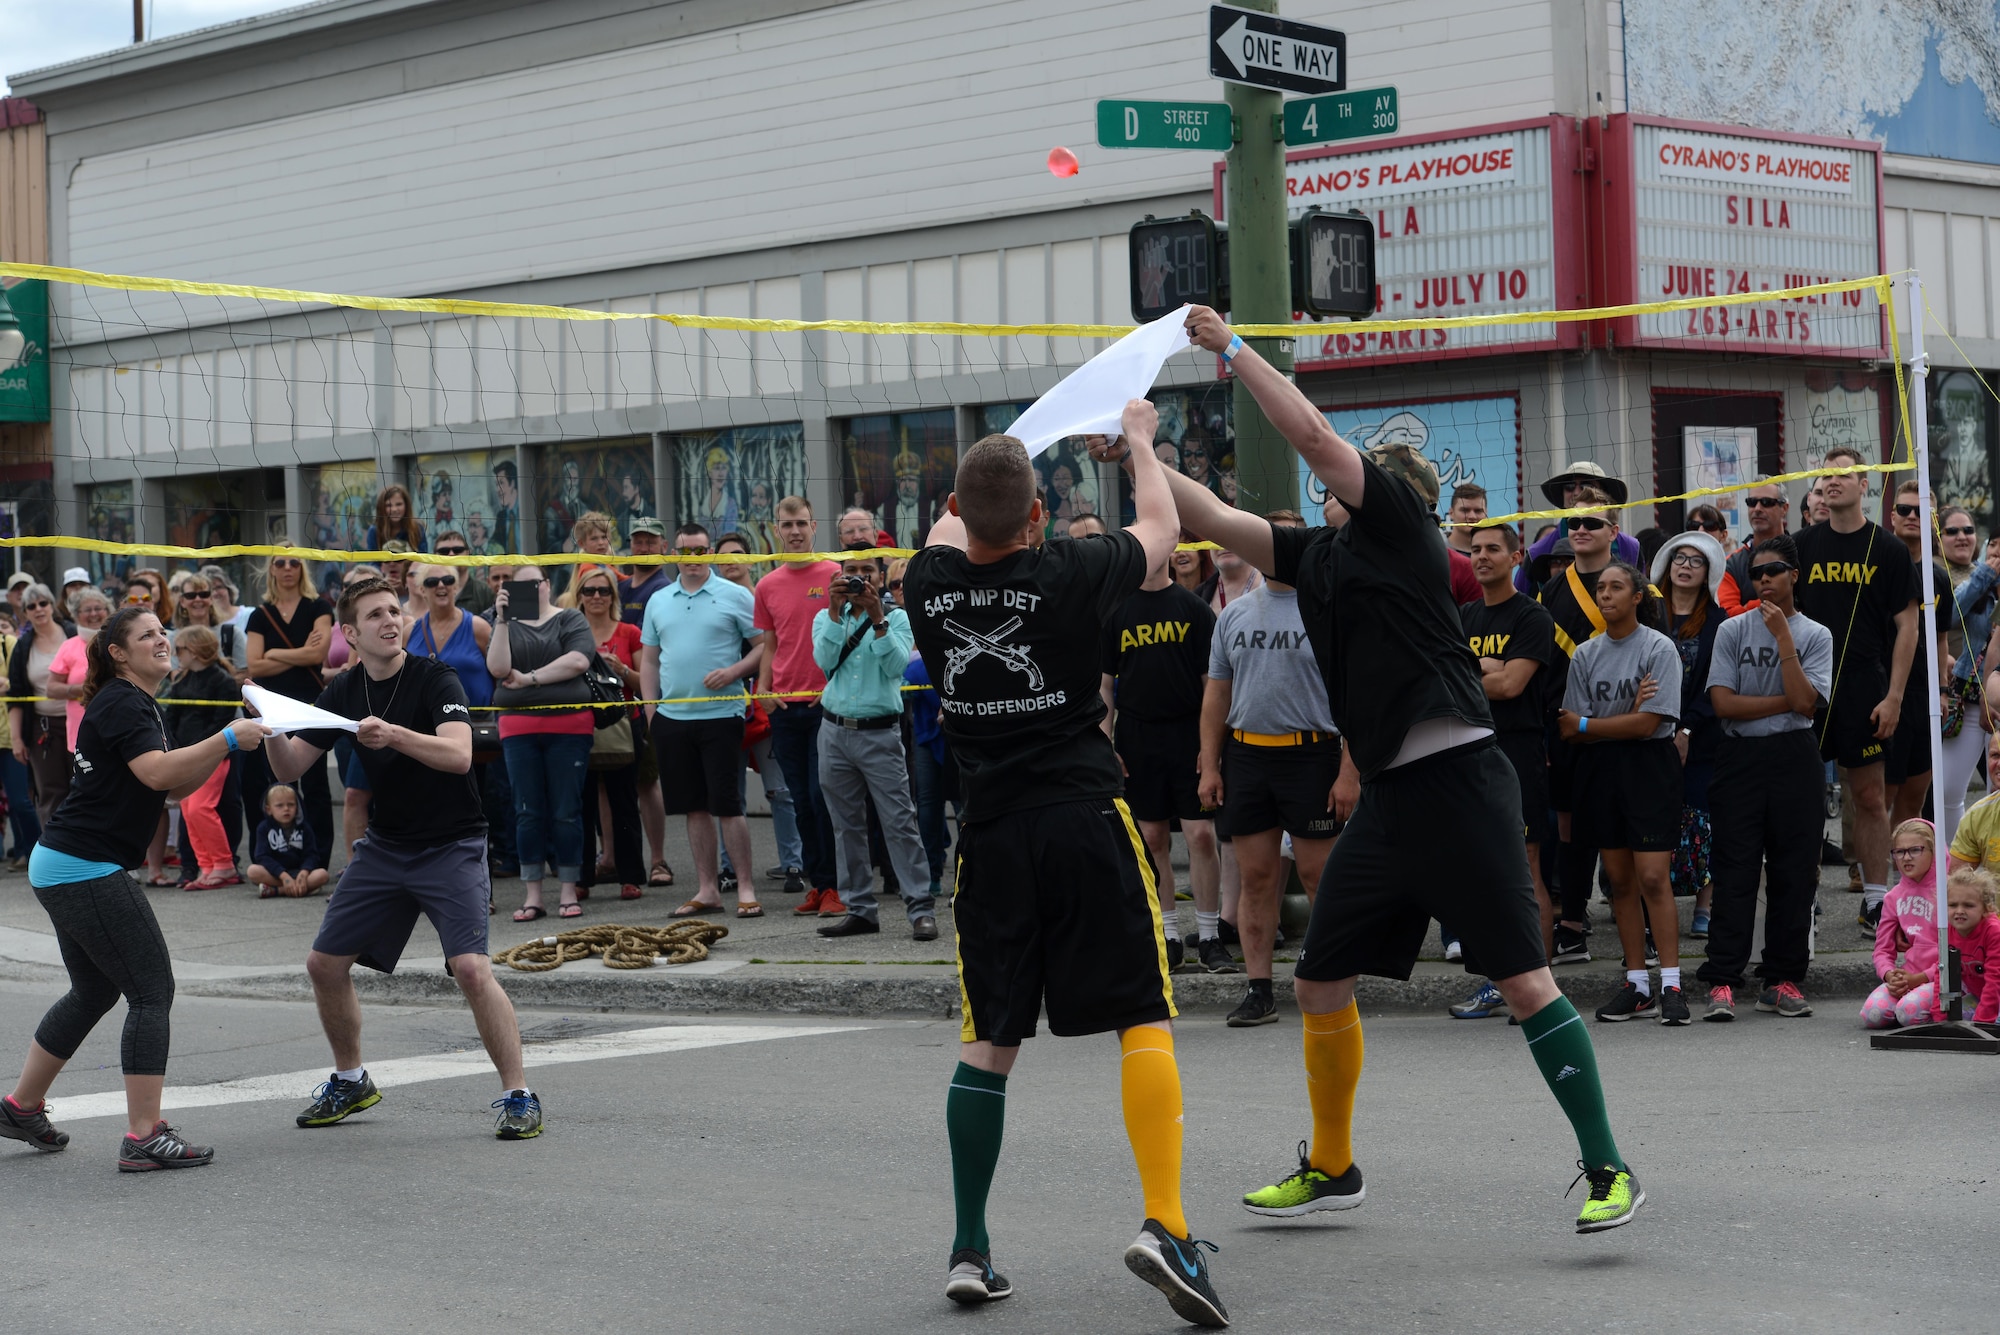 The ‘Arctic Defenders,’ of the 545th Military Police Company, ‘serves’ in a game of water balloon volleyball against the Anchorage Police Department as part of the Hero Games during the Downtown Summer Solstice Festival in Anchorage, Alaska, June 18, 2016. Water balloon volleyball was the final high-stakes challenge where competitors sought the first place title at the risk of being splashed with cold water. The Hero Games is a friendly competition between Alaska’s first responders with challenges that require balance, strength and teamwork. (U.S. Air Force photo Airman 1st Class Christopher R. Morales)